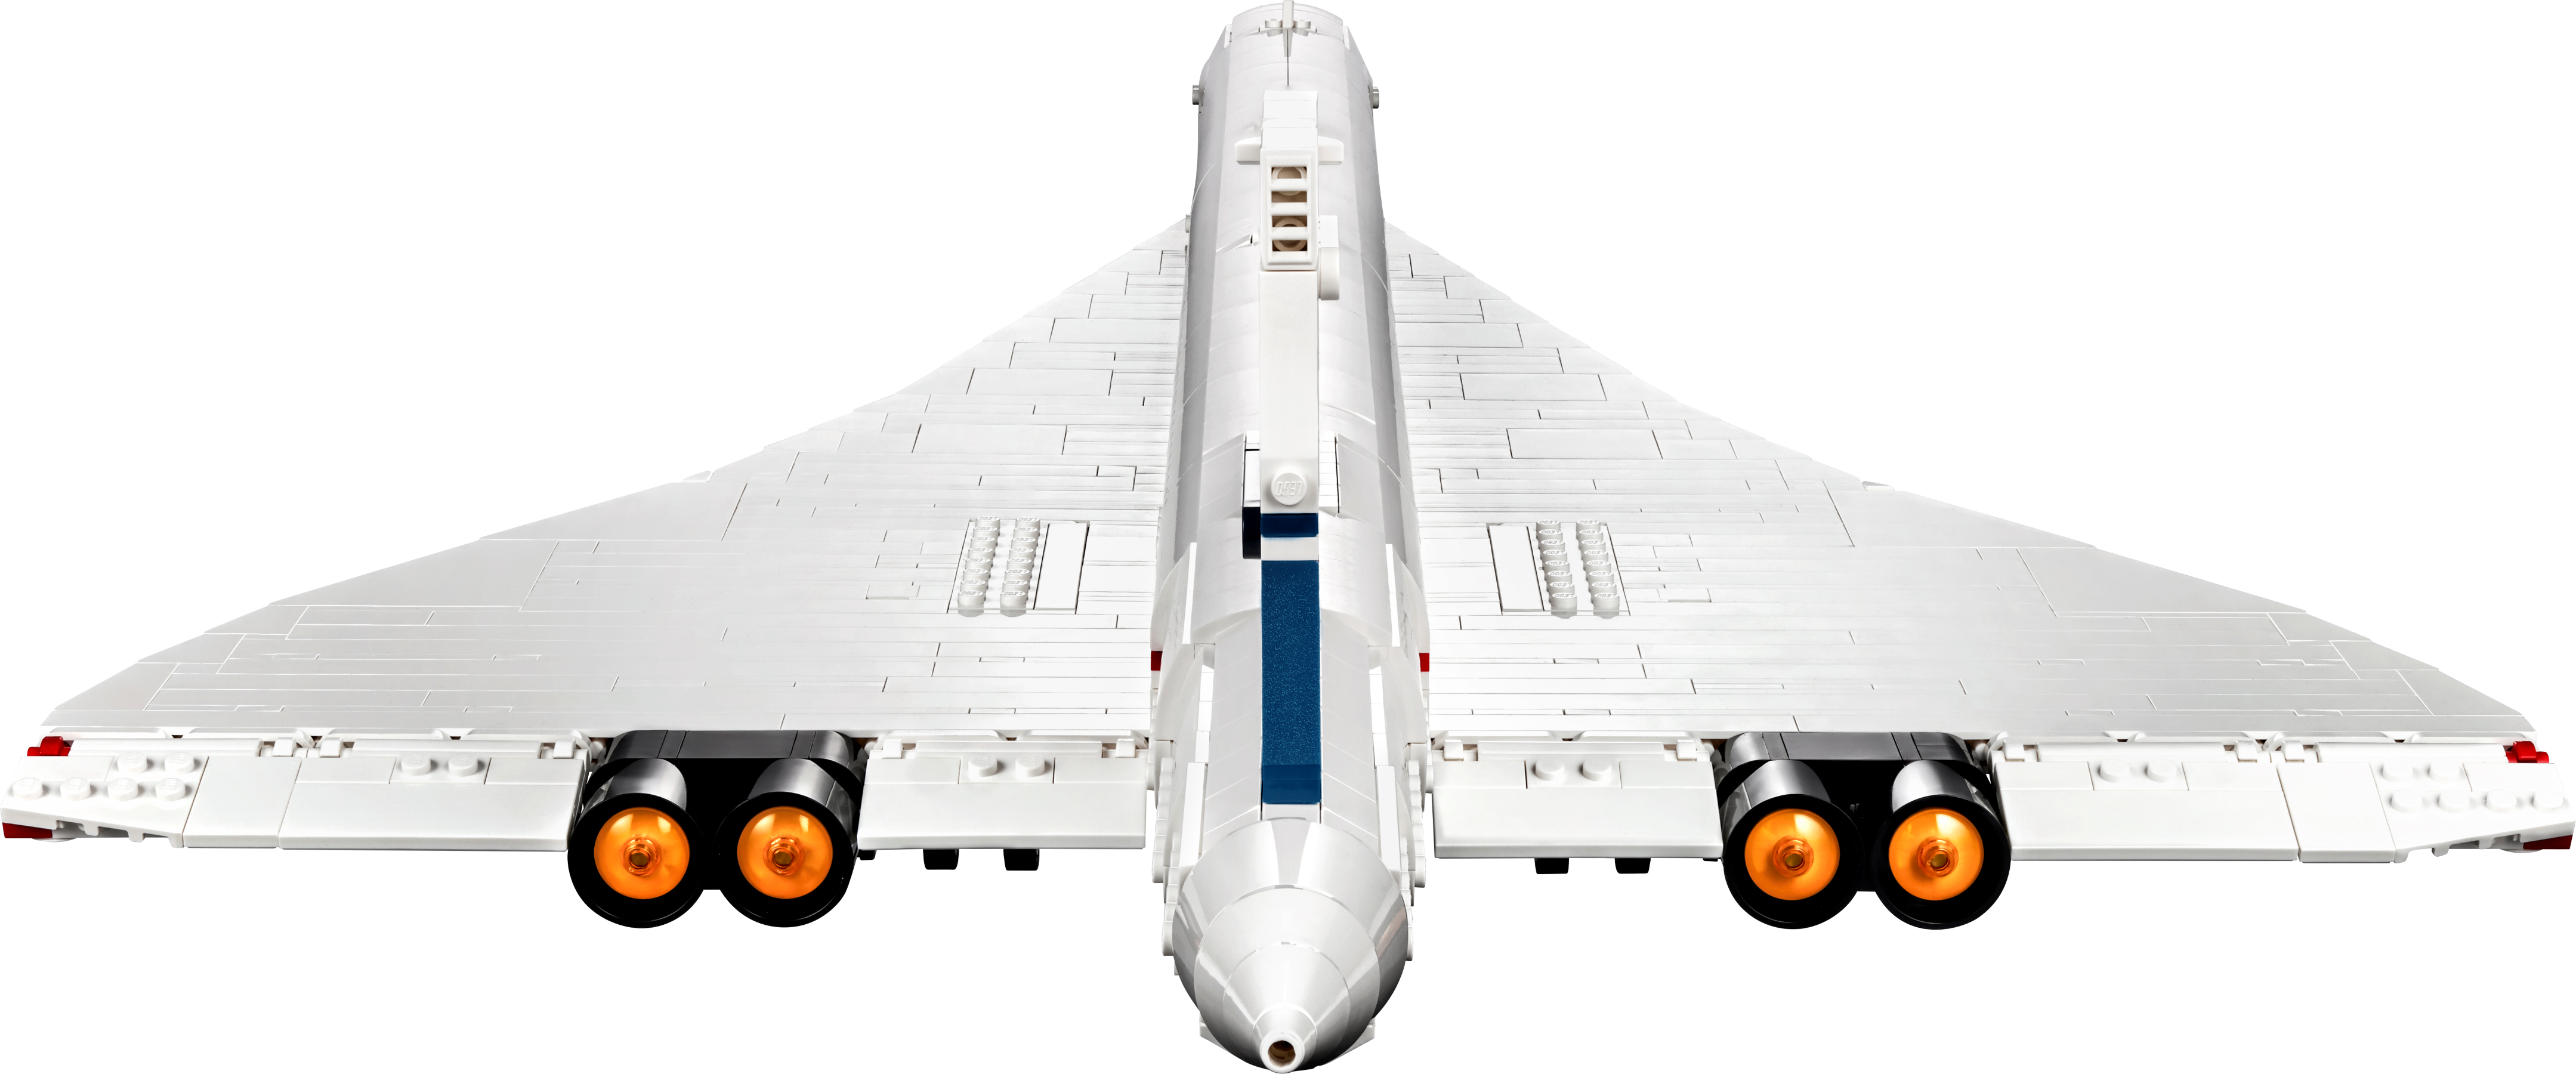 Lego's new $200 Concorde is a fantastic homage to the supersonic